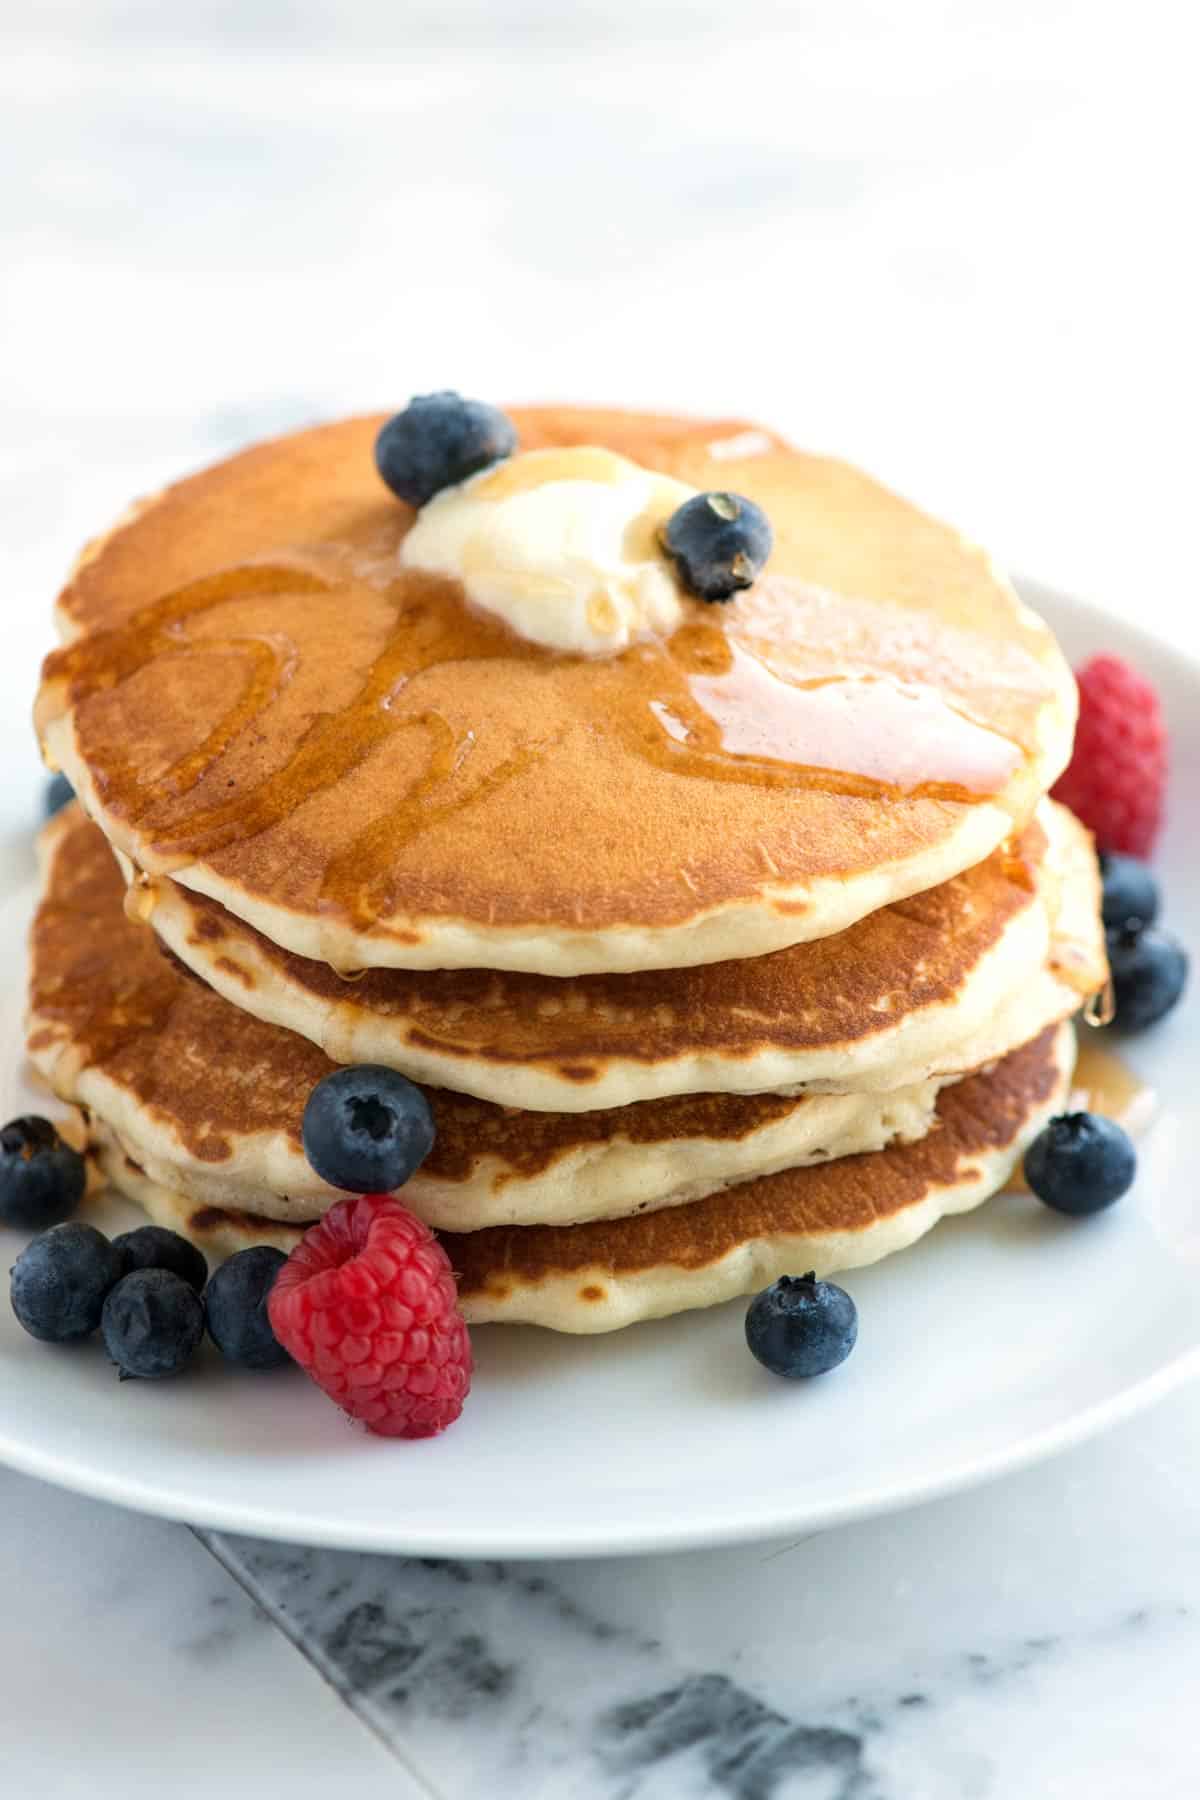 Easy Fluffy Pancakes Recipe from Scratch